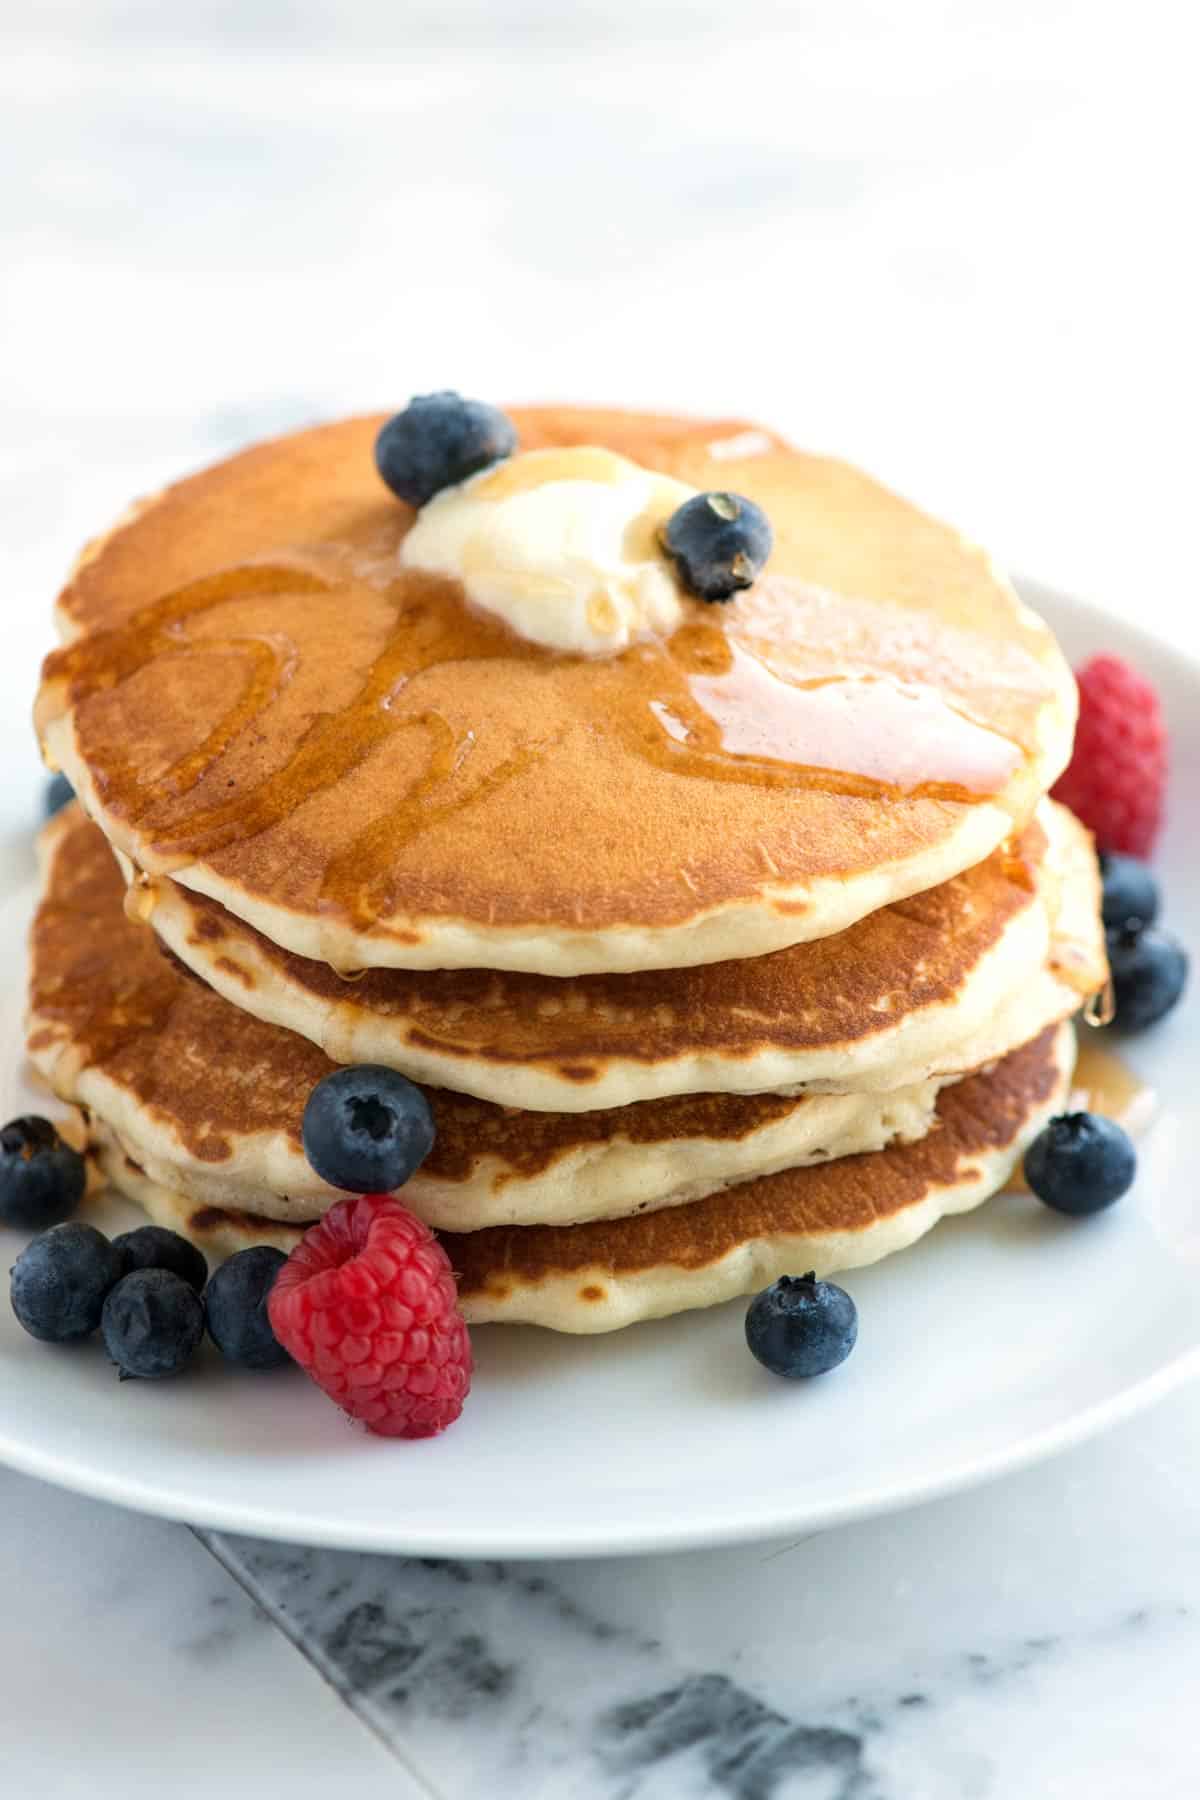 Easy Fluffy Pancakes Recipe from Scratch